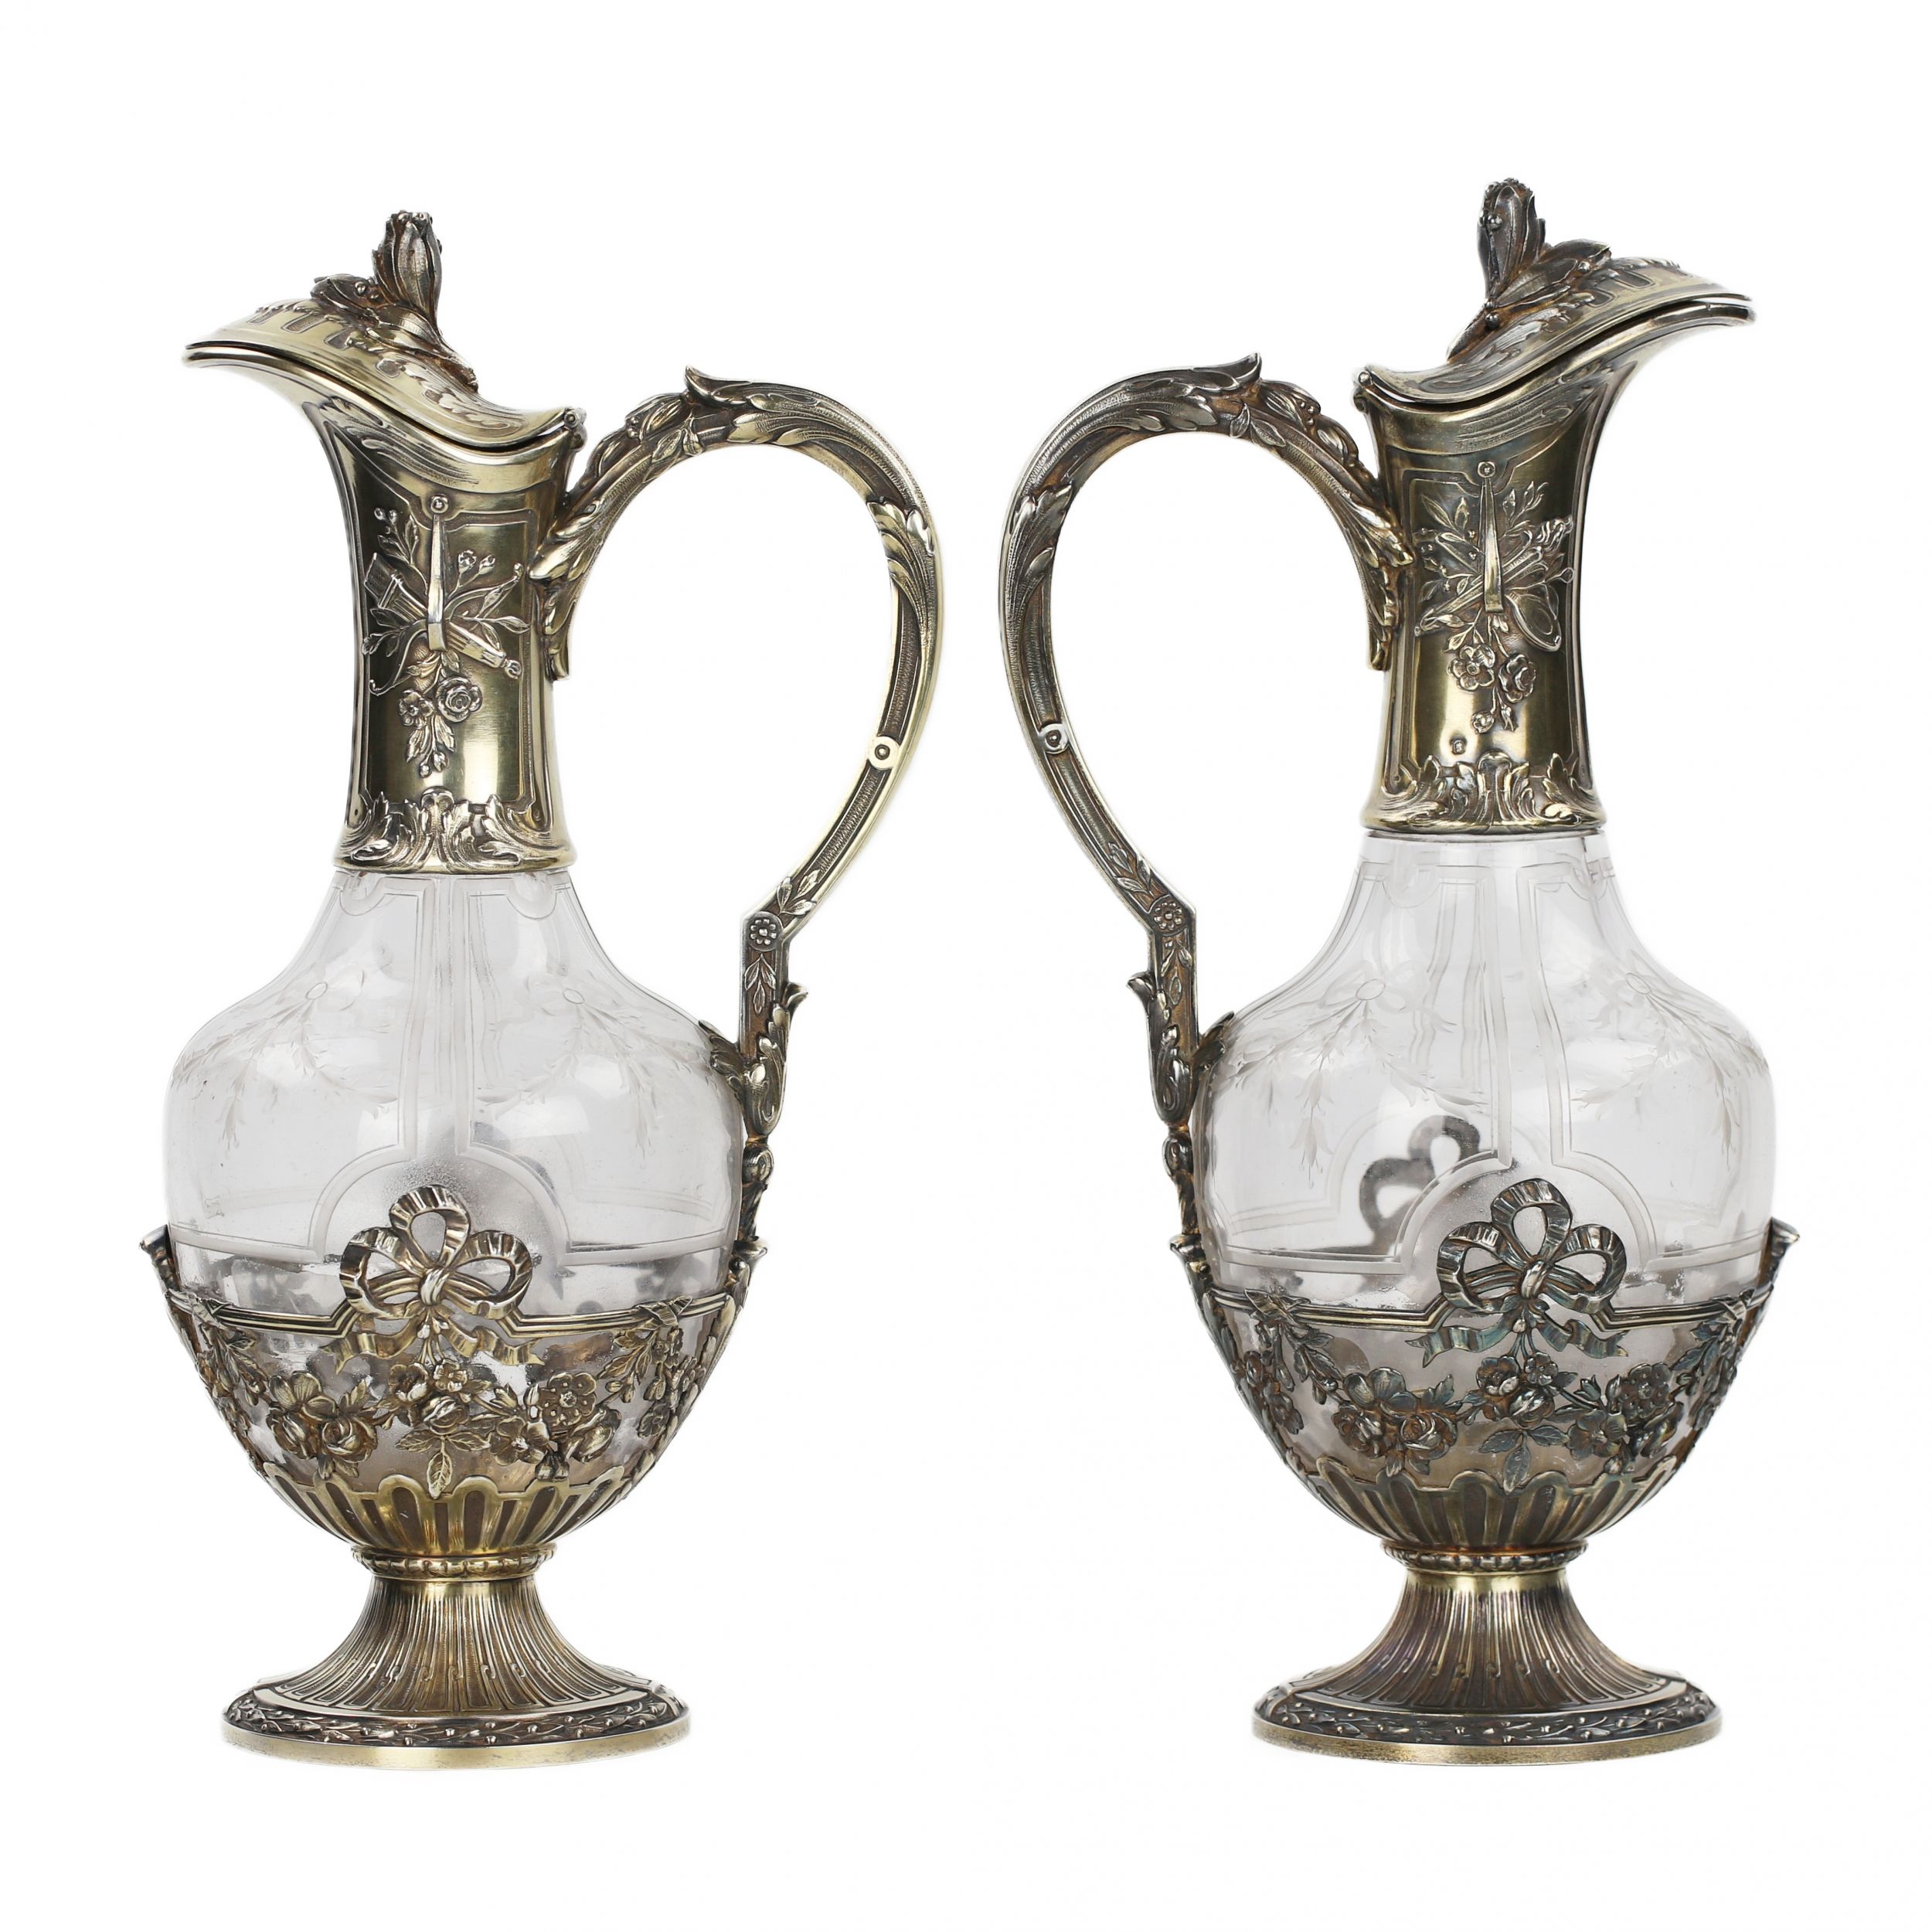 Pair of French glass wine jugs in silver from the late 19th century. - Image 3 of 9